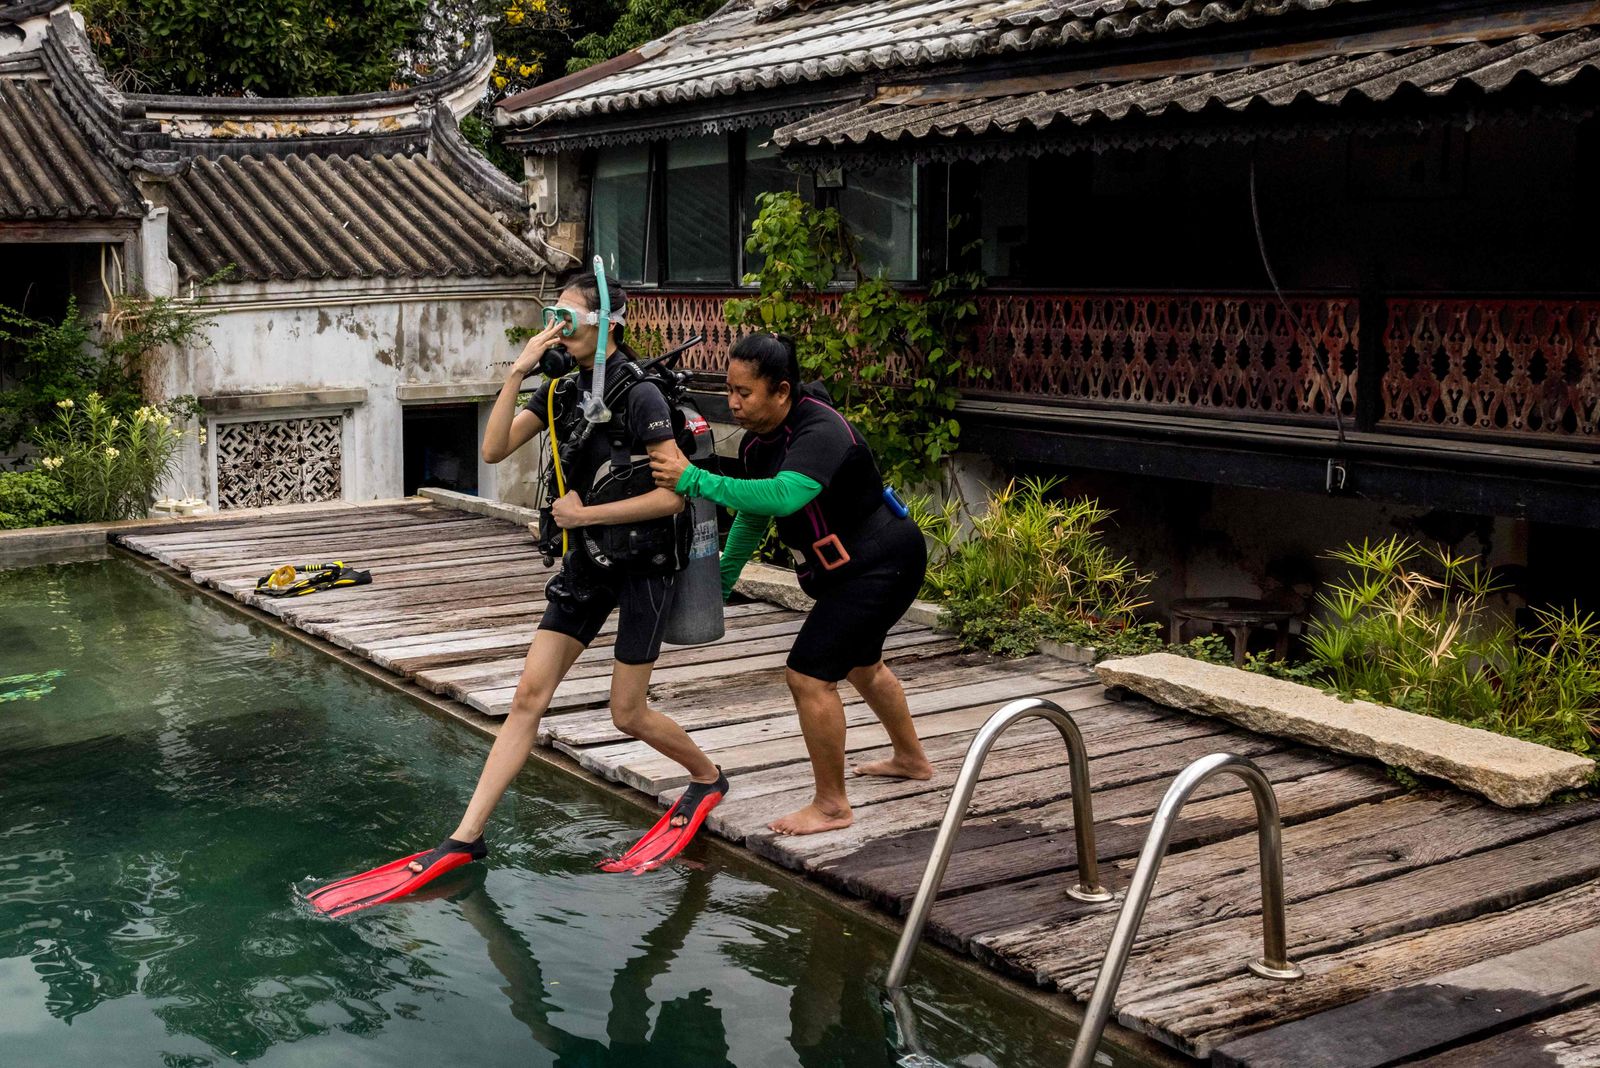 In this photo taken on February 15, 2022, Pijitra Siriaiyara jumps into the swimming pool during a scuba diving lesson at the So Heng Tai mansion in the Talad Noi neighbourhood of Bangkok. - A 200-year-old Chinese mansion in Bangkok's heart isn't an obvious place for a scuba school, but in a city relentlessly demolishing its architectural heritage the business is helping preserve the historic home. (Photo by Jack TAYLOR / AFP) / TO GO WITH Thailand-heritage-architecture-construction, FOCUS by Lisa MARTIN - AFP